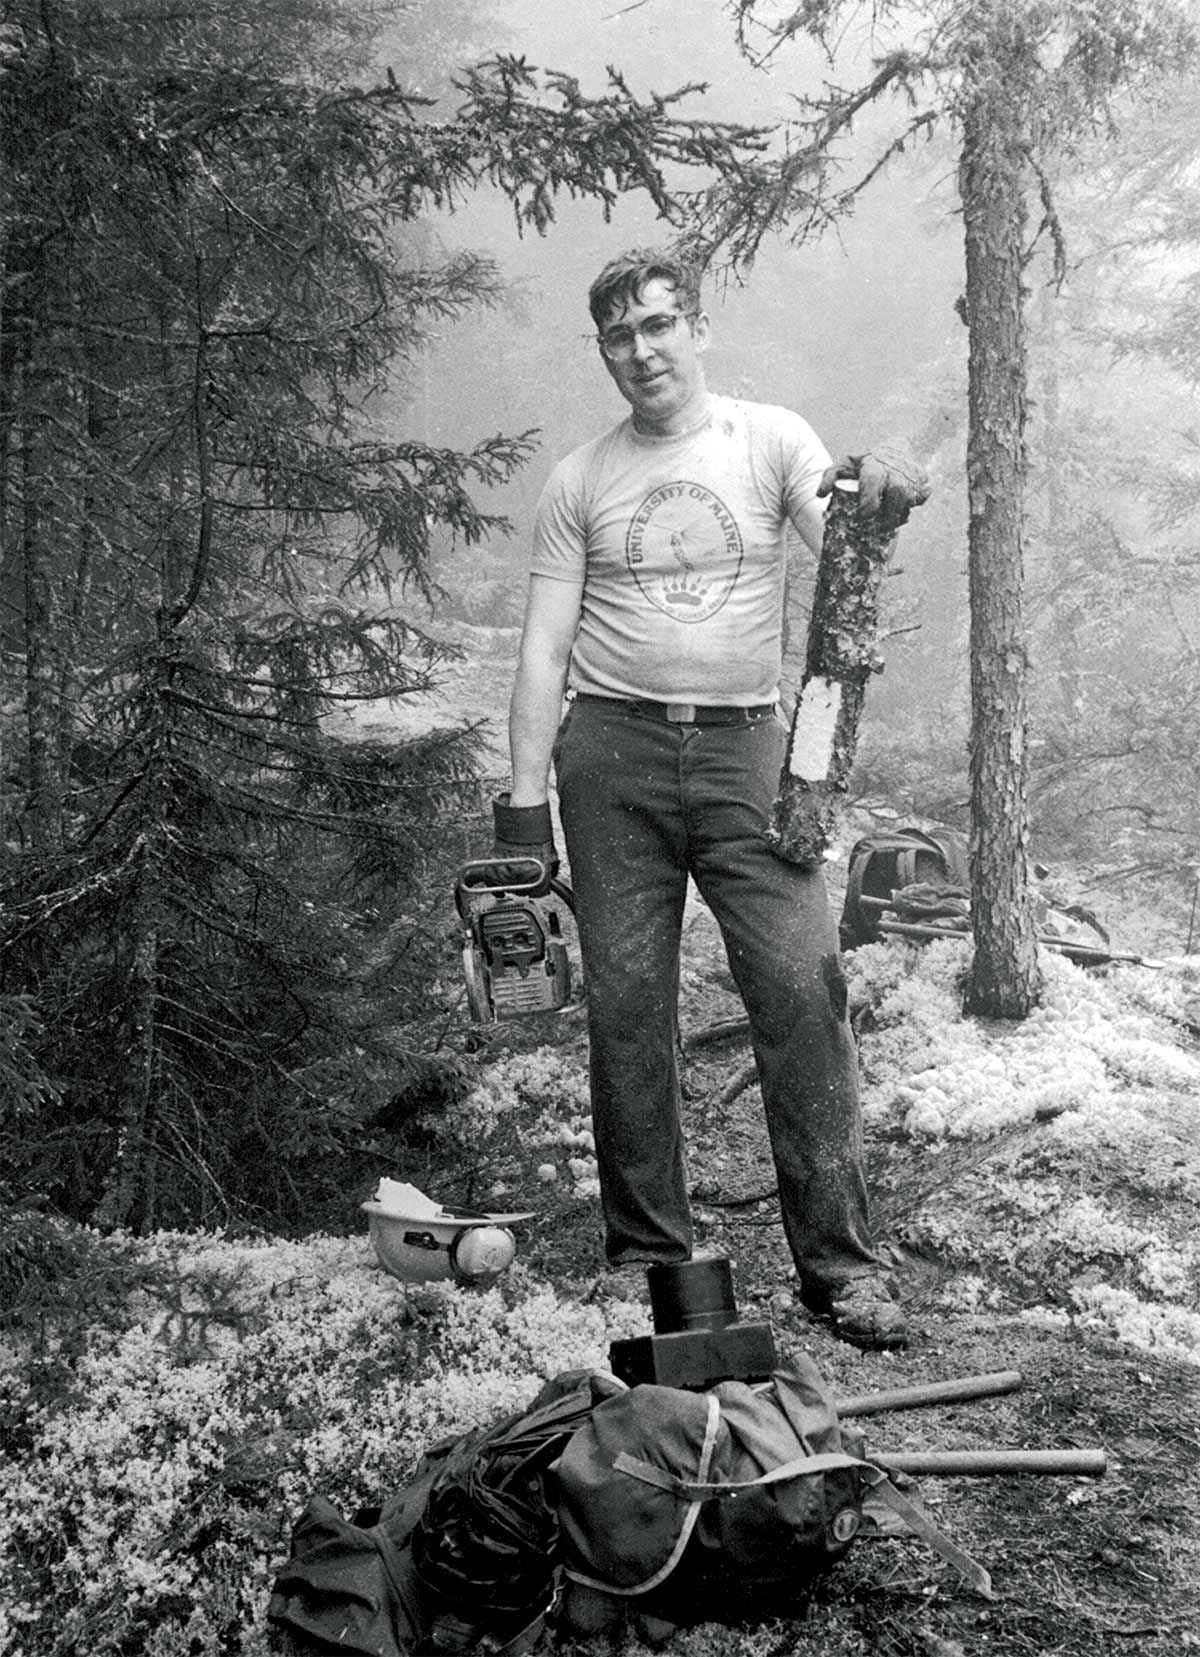 Dave Field in 1985 poses with a “rescued” white blaze while doing Trail work